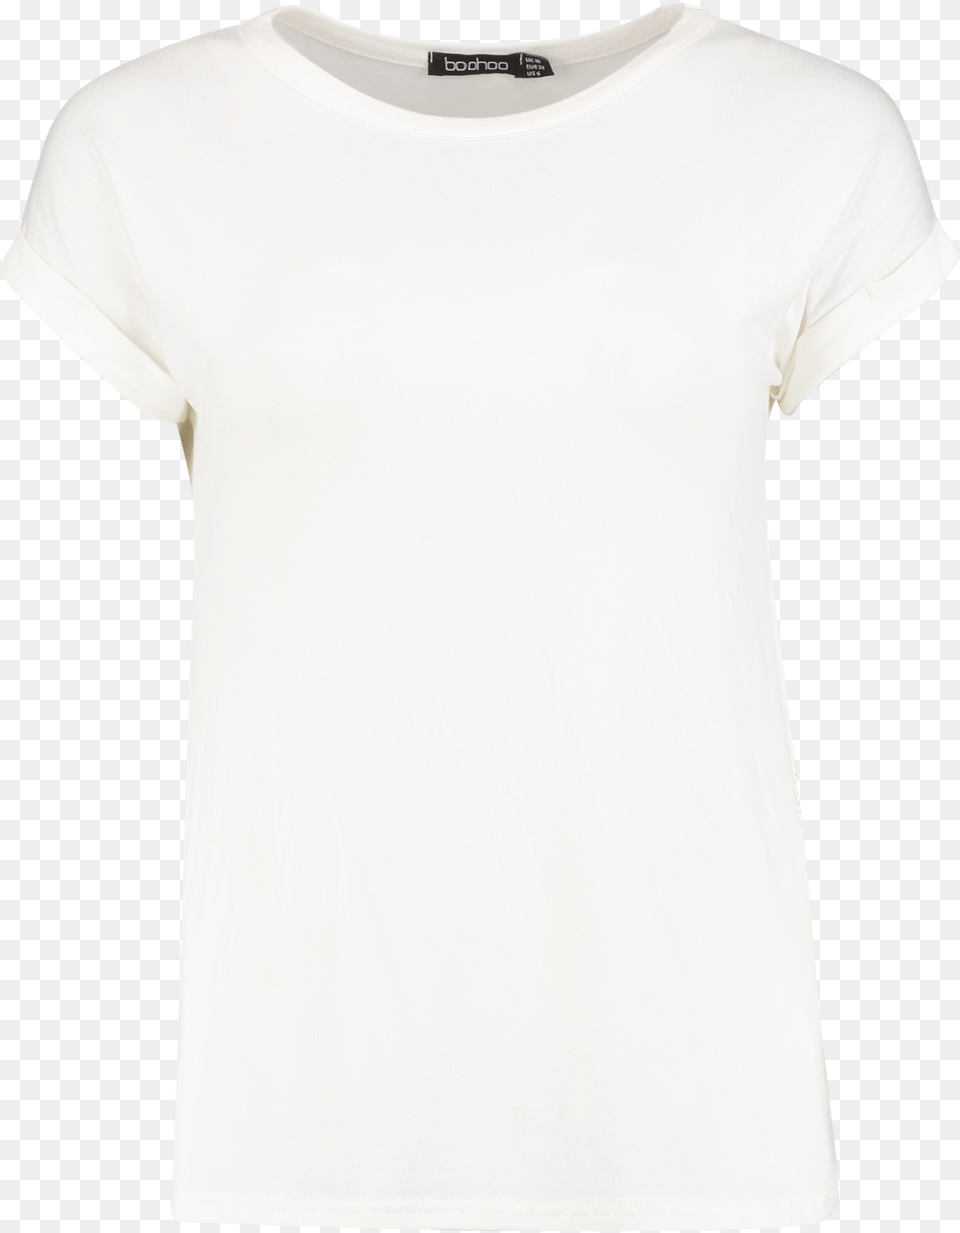 Turn Cuff Basic Tee 8 White Shirt For Design, Clothing, T-shirt Png